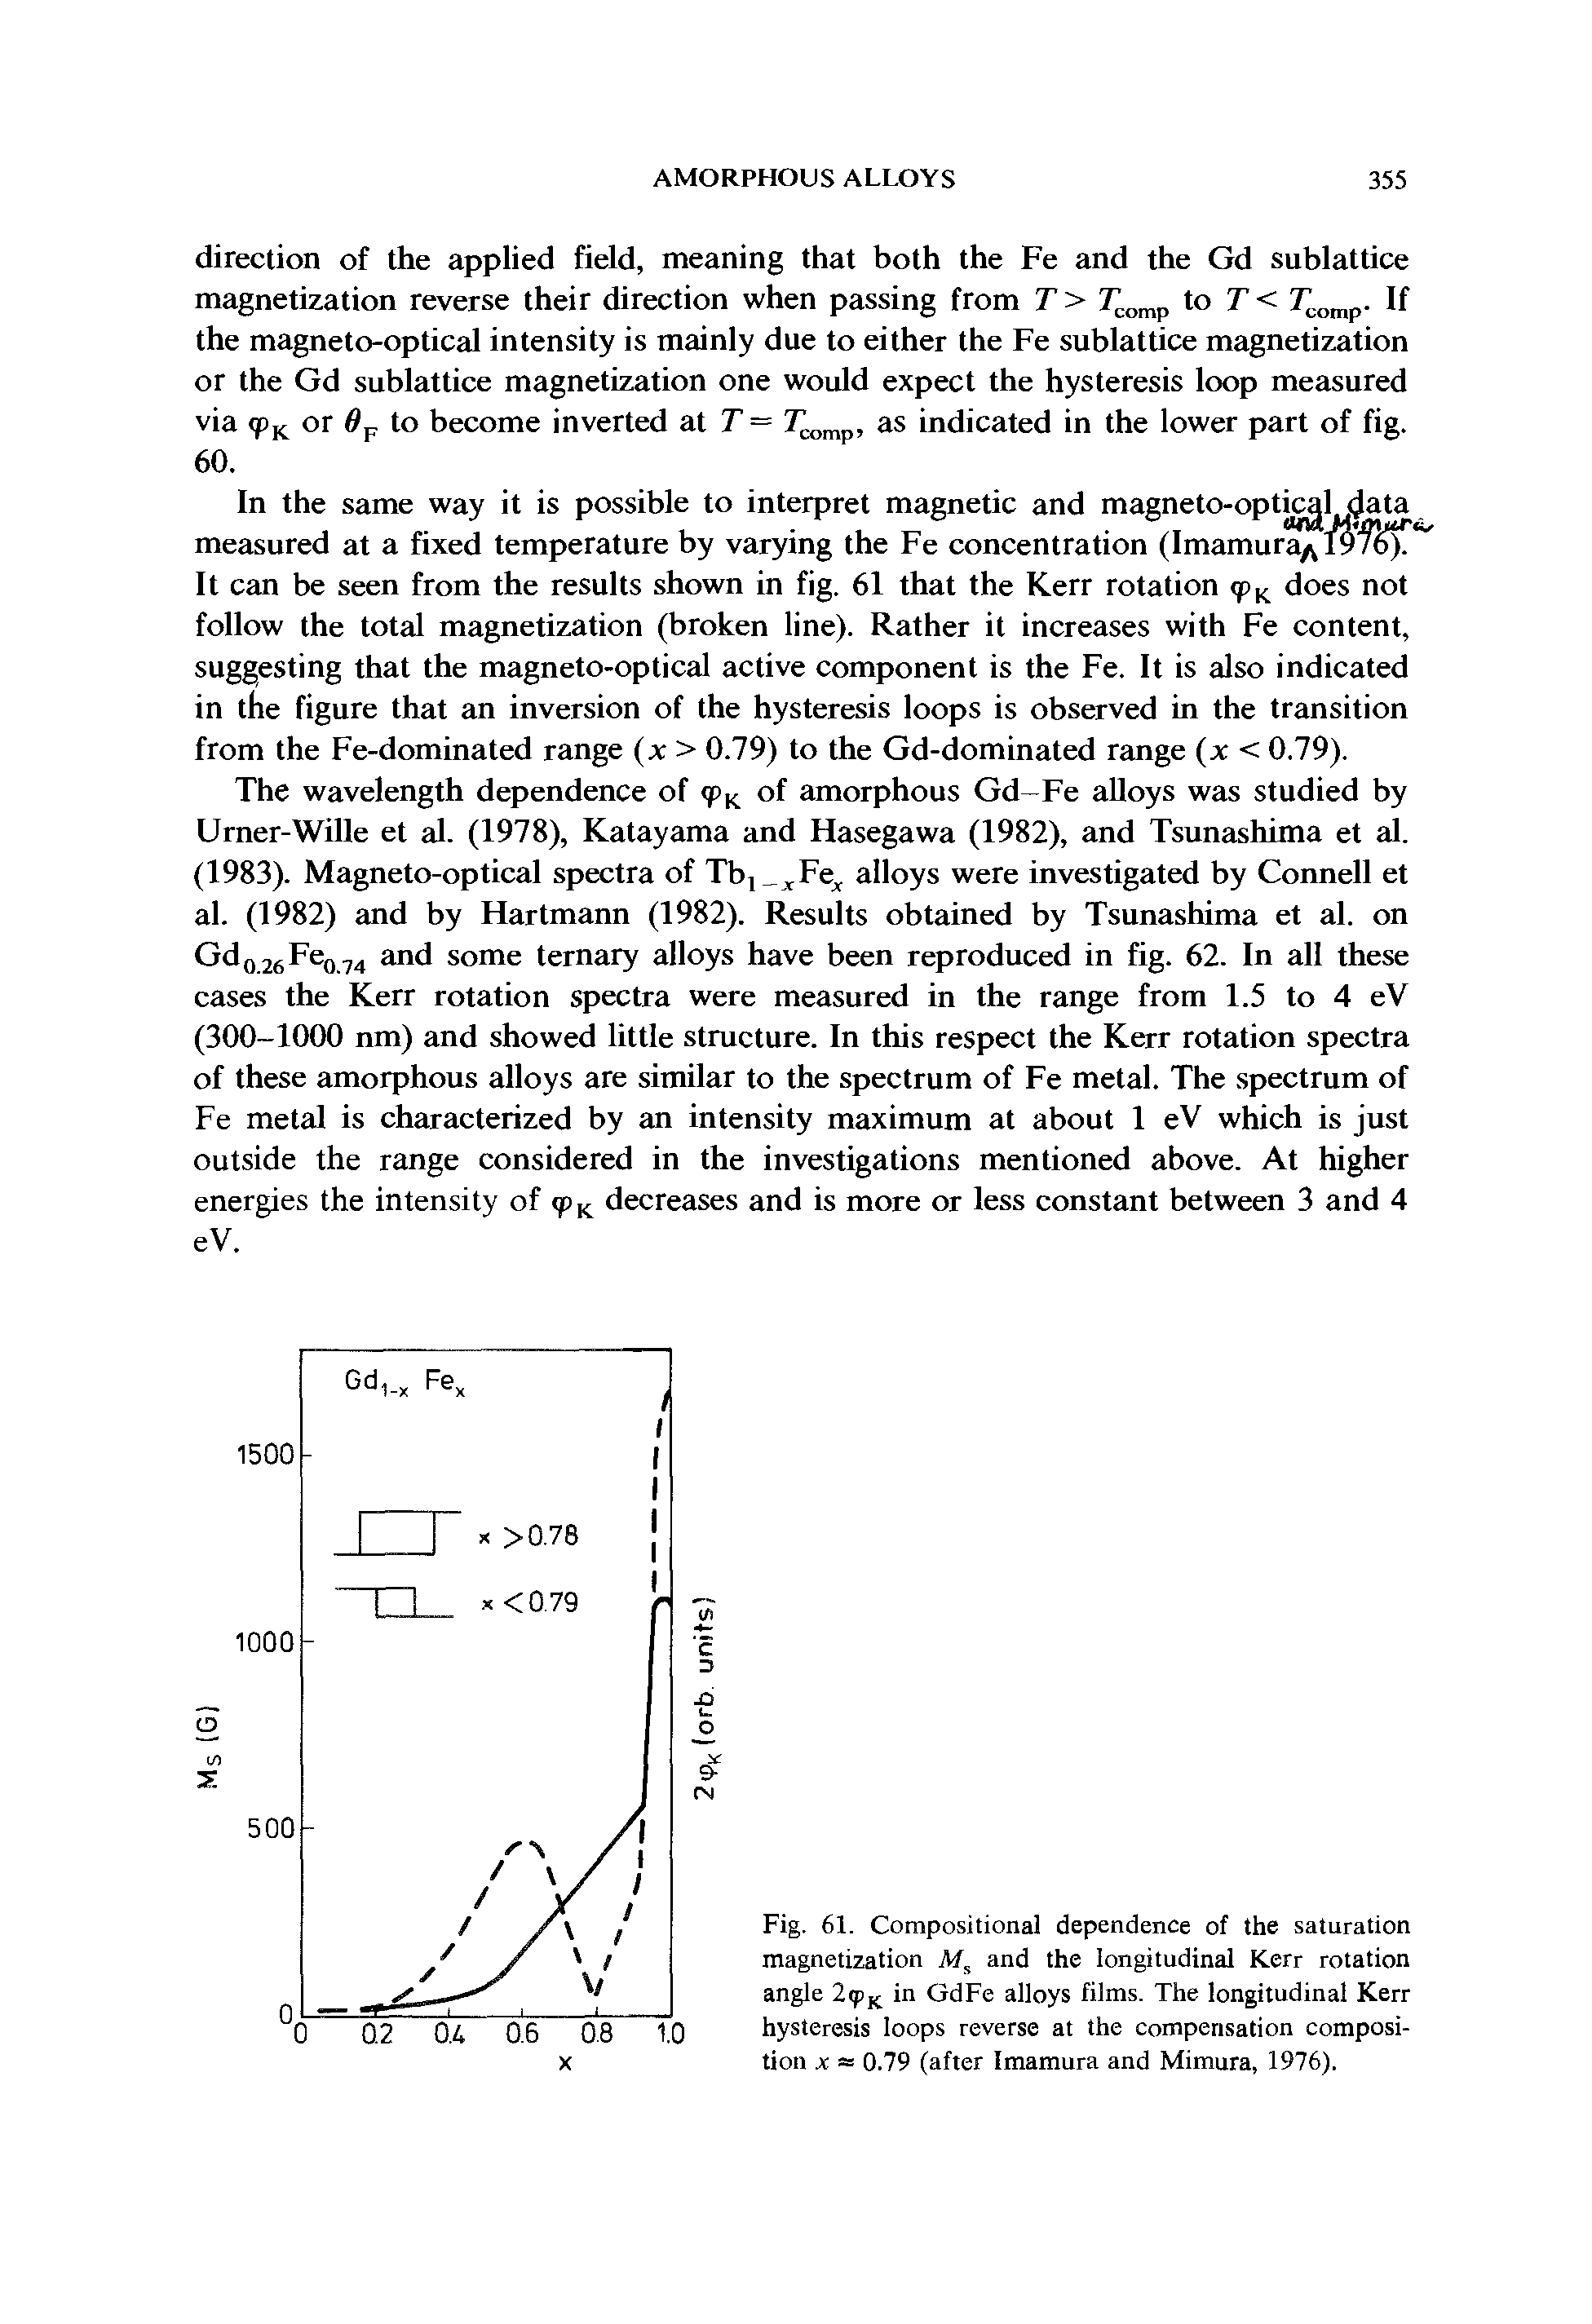 Fig. 61. Compositional dependence of the saturation magnetization M, and the longitudinal Kerr rotation angle in GdFe alloys films. The longitudinal Kerr hysteresis loops reverse at the compensation composition jc = 0.79 (after Imamura and Mimura, 1976).